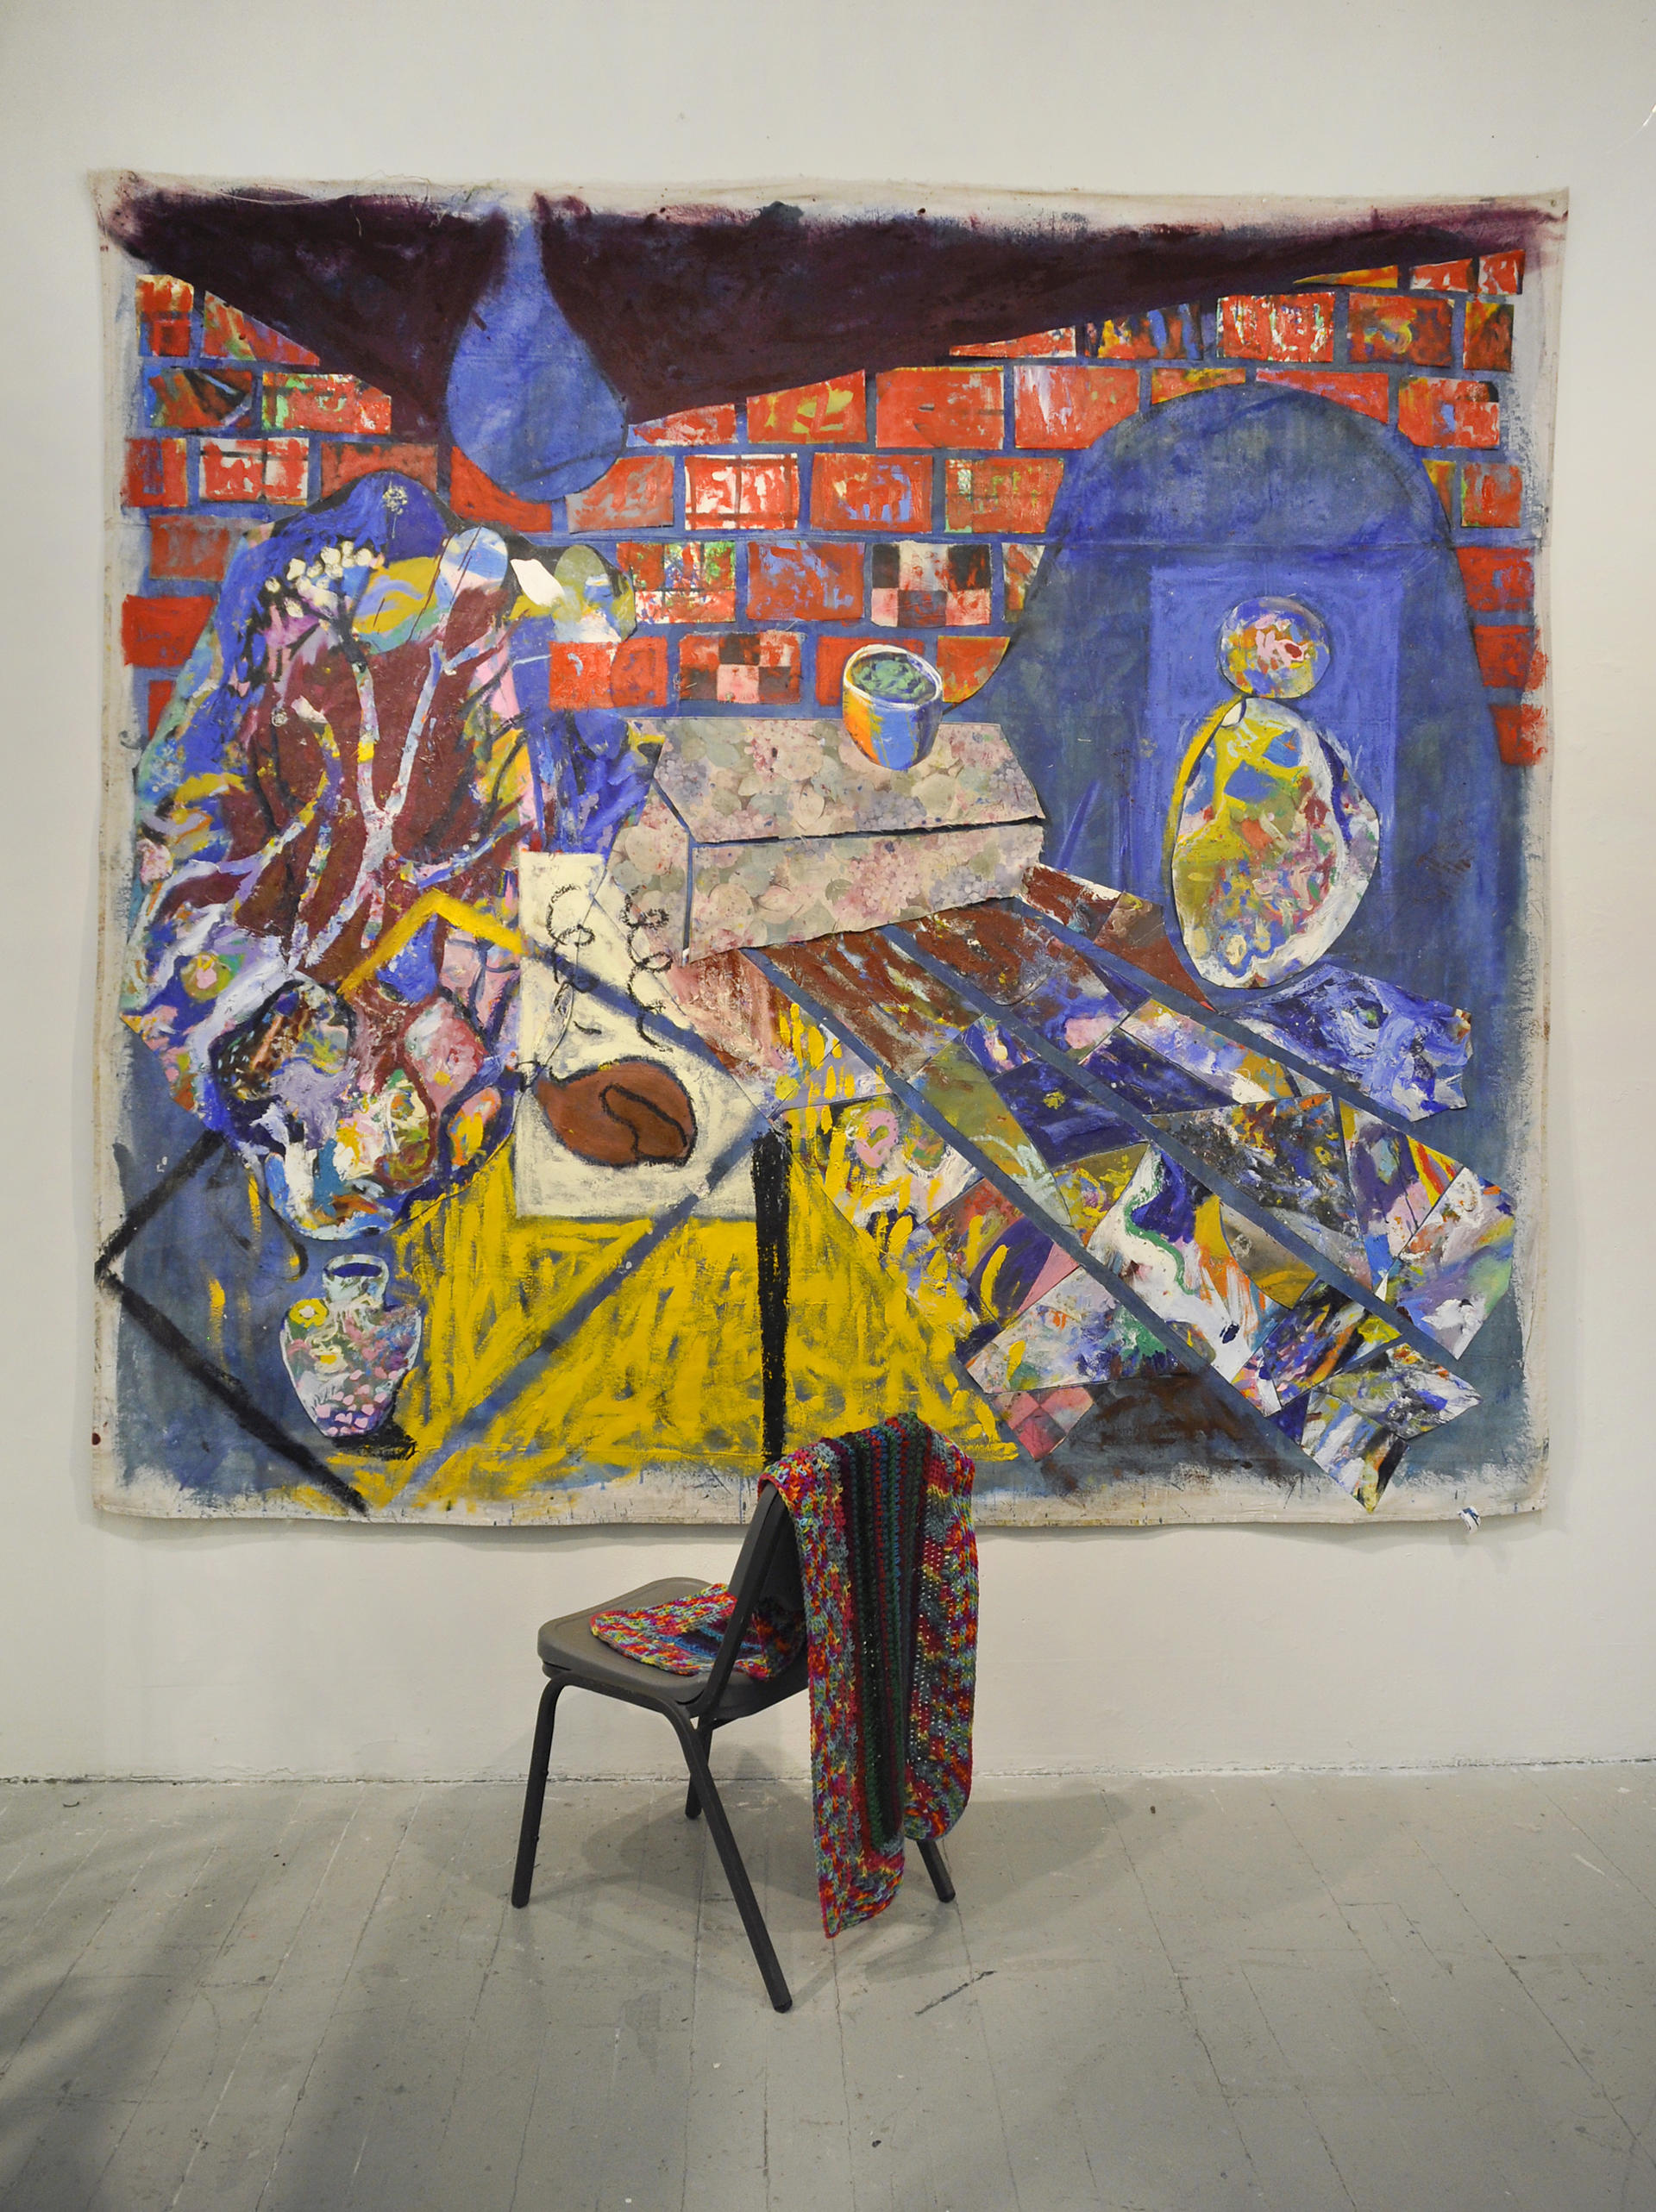 Abstract table with food and figure in doorway.